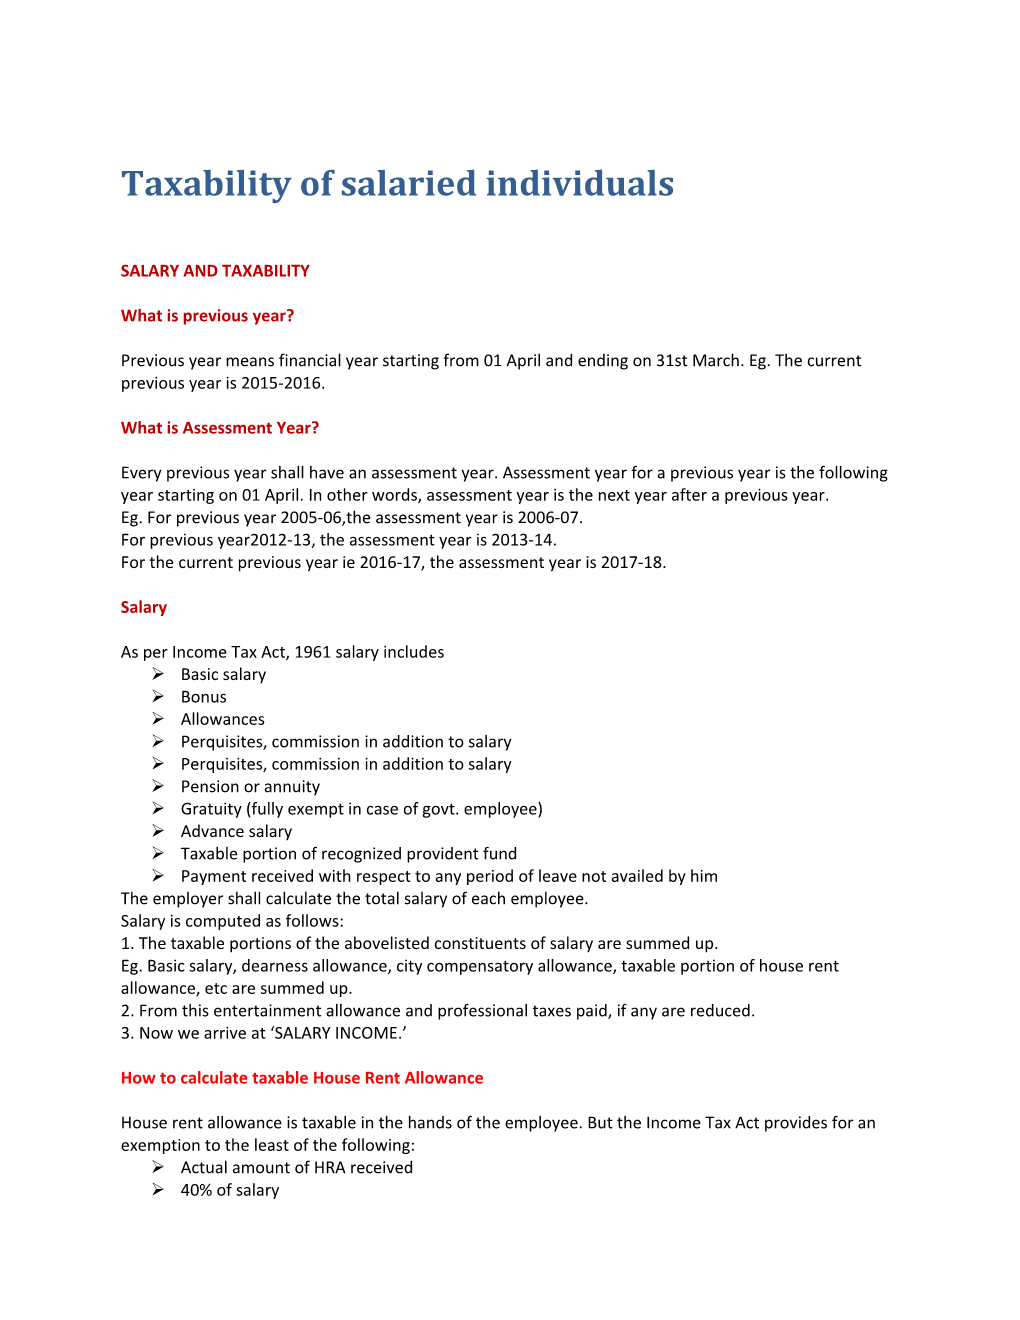 Taxability of Salaried Individuals